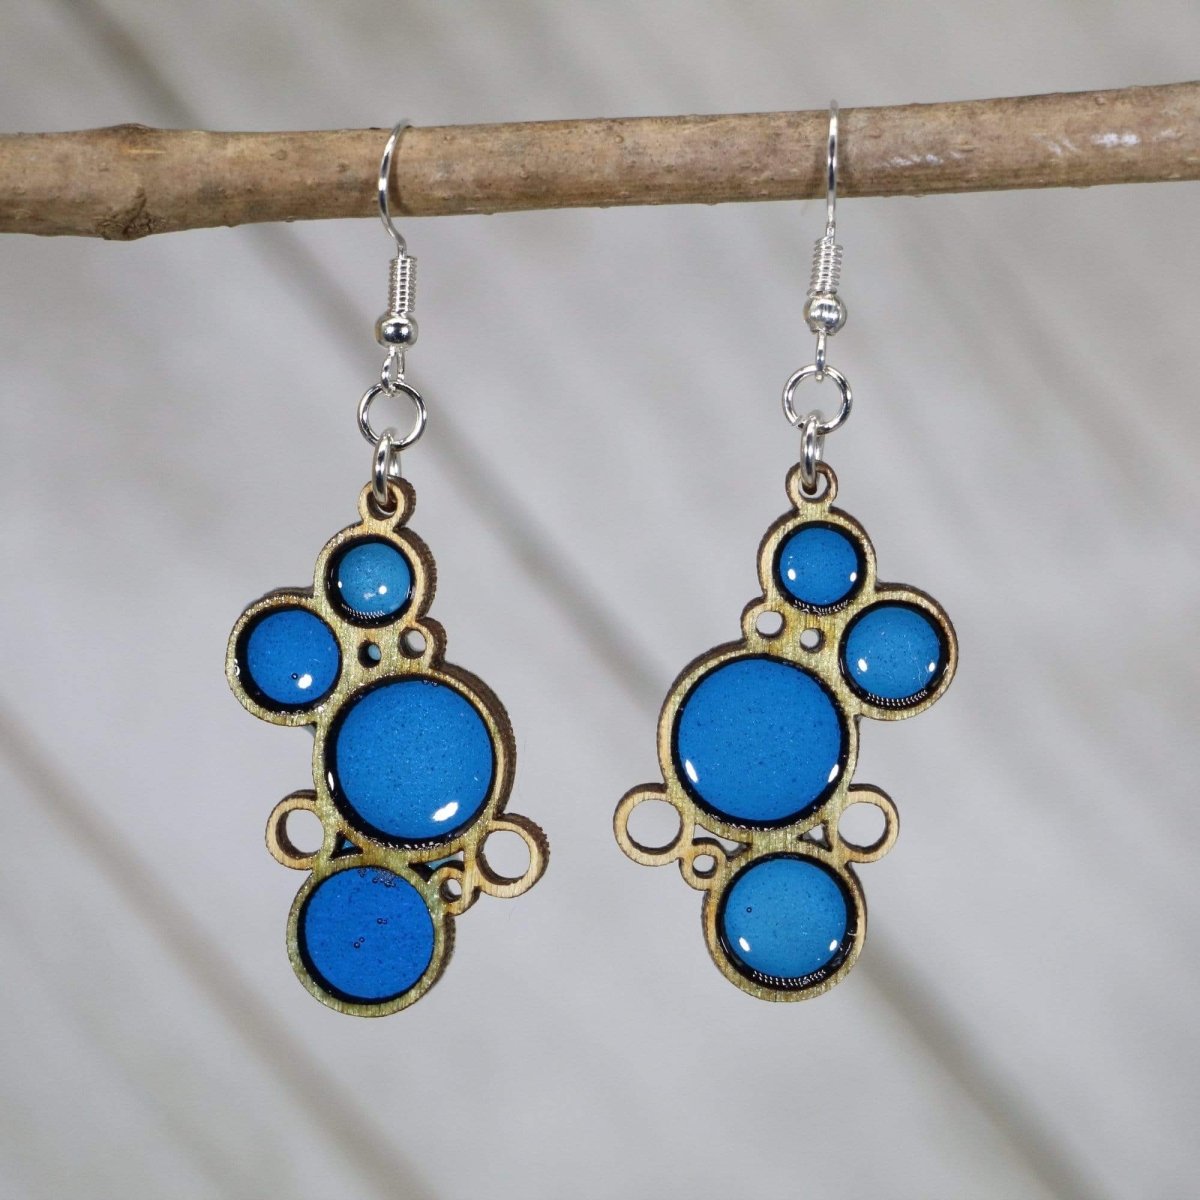 Colorful Boho Bubble Wooden and Resin Dangle Earrings - Blue - Cate's Concepts, LLC